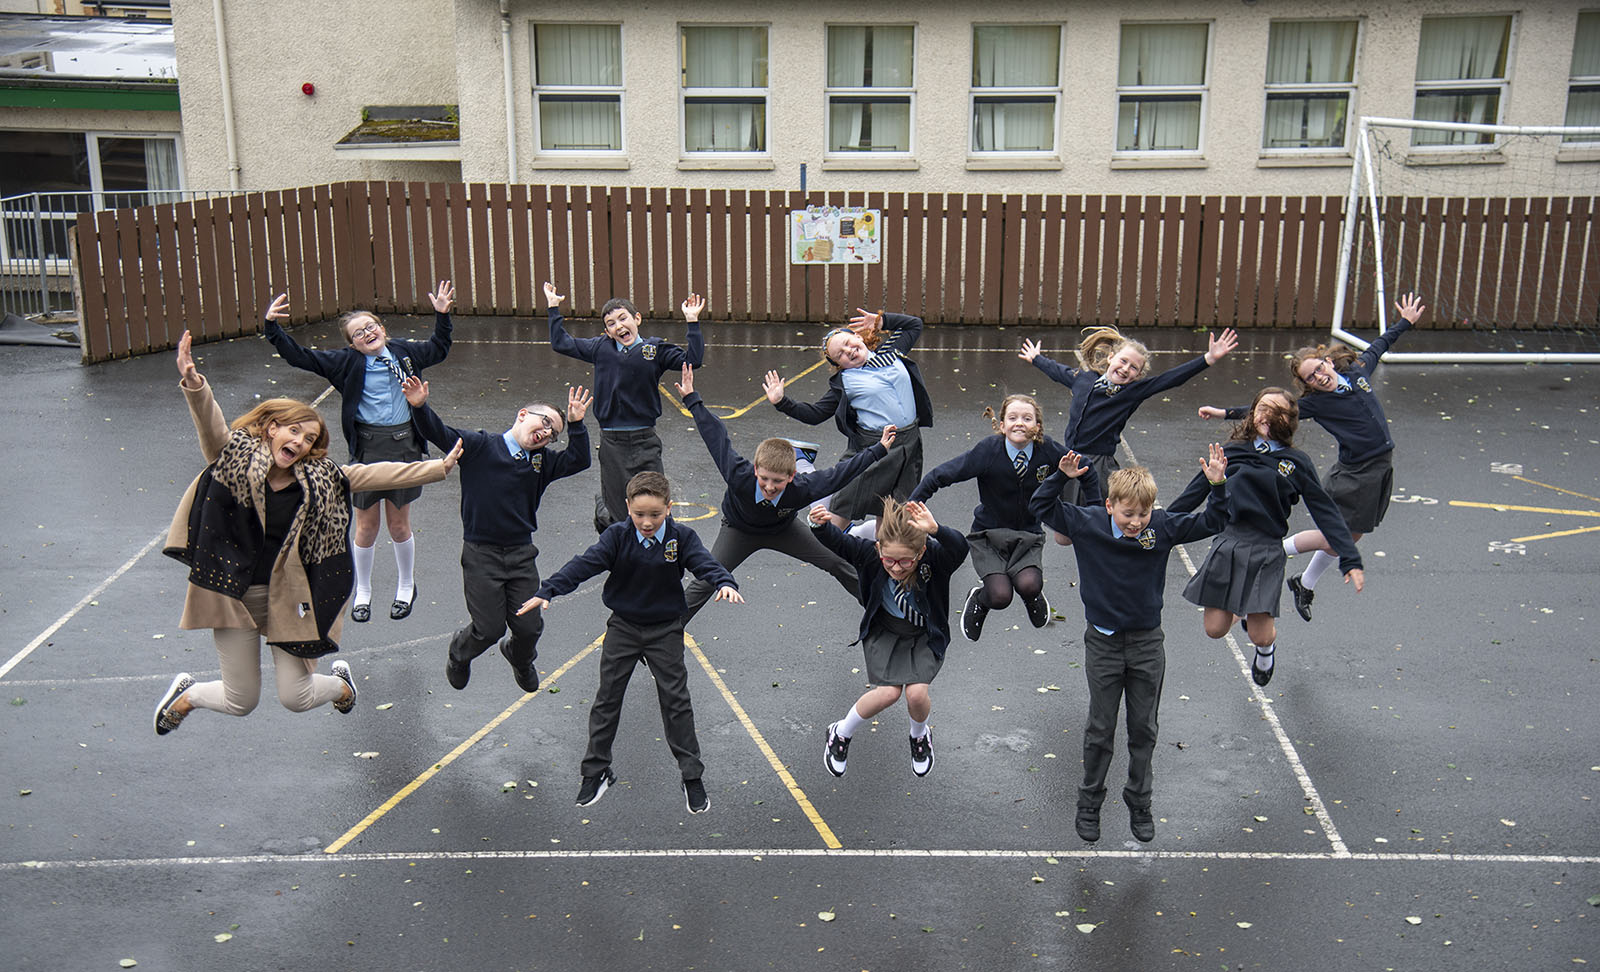 ‘Best day ever’ as schools reopen to excited pupils